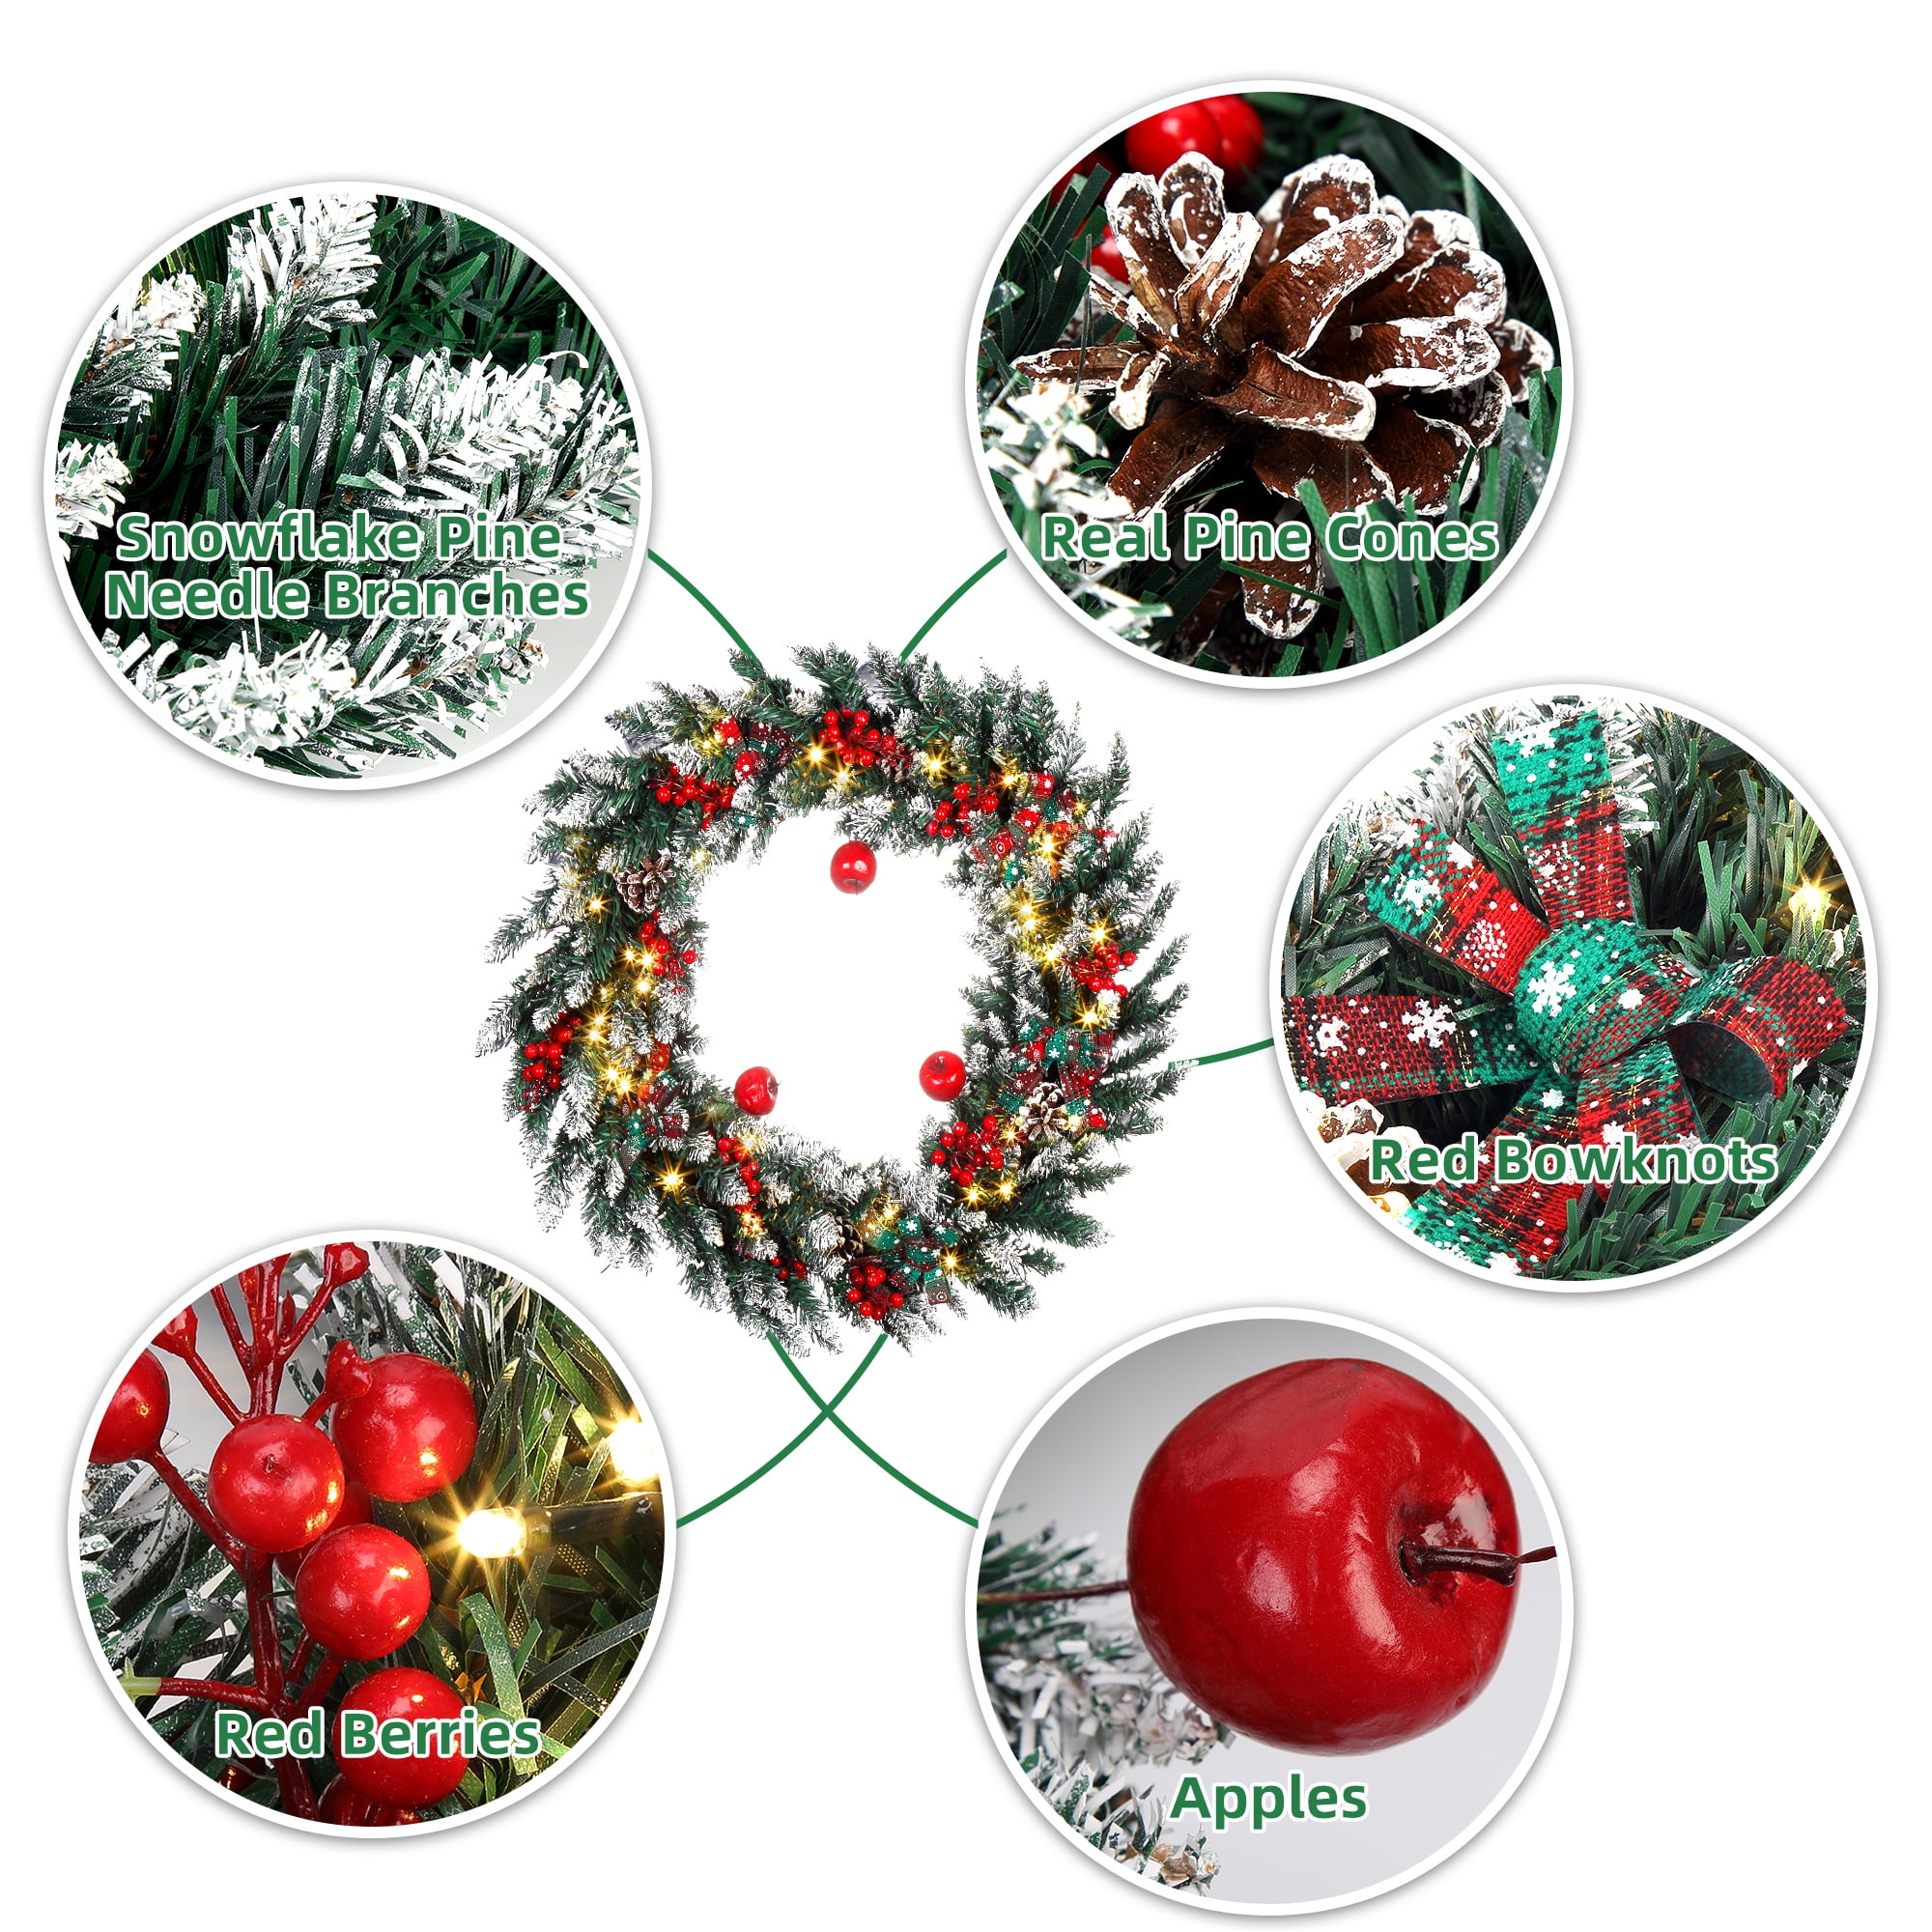 2022 Christmas Decorations for Home Handmade Berry Heart Wreath Front Door  Wreaths Navidad New Year Rustic Festivals Natal Decor - Price history &  Review, AliExpress Seller - Mr Pine Cone Store